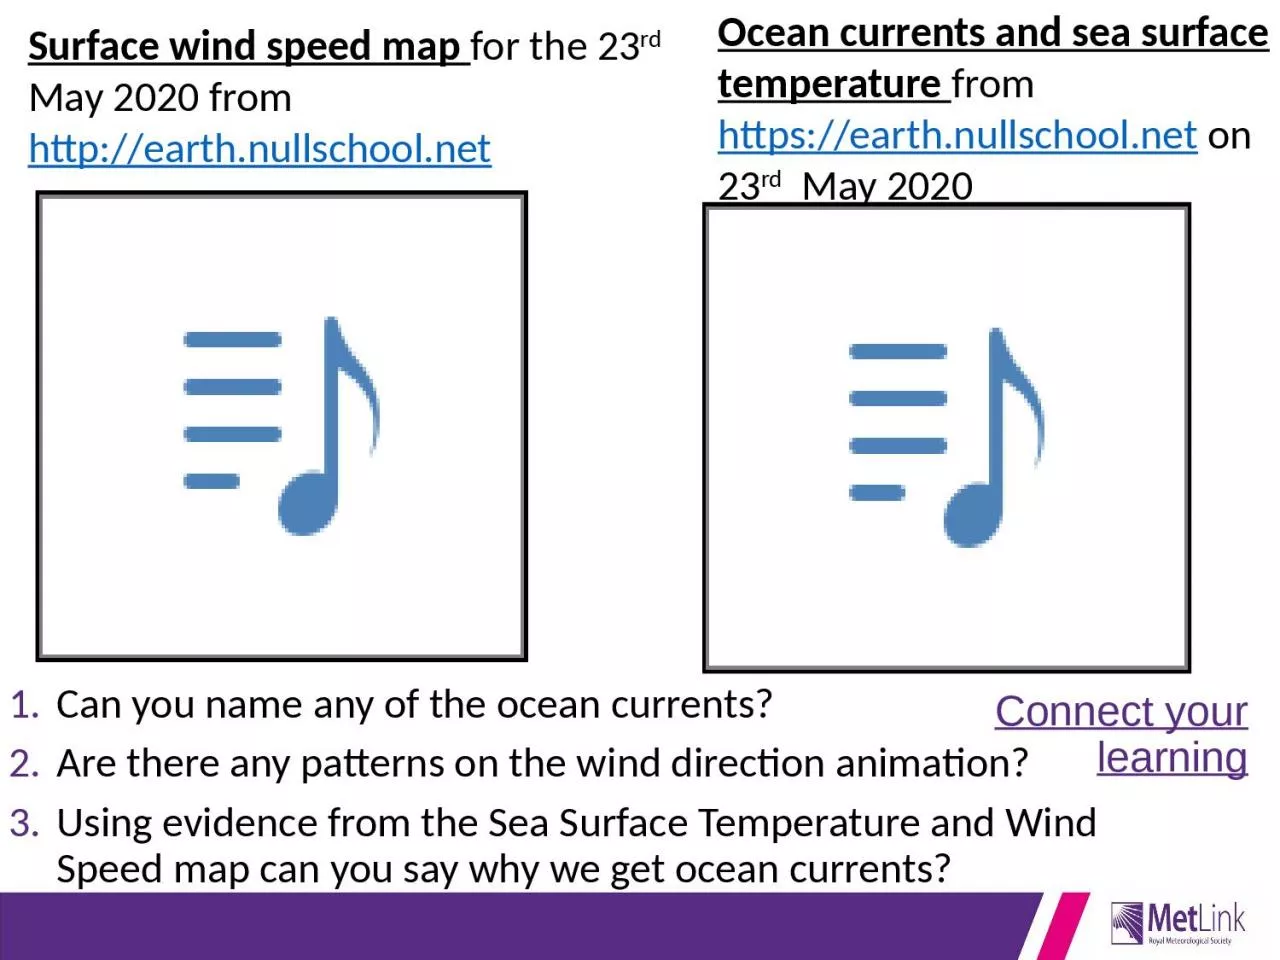 Connect your learning Can you name any of the ocean currents?